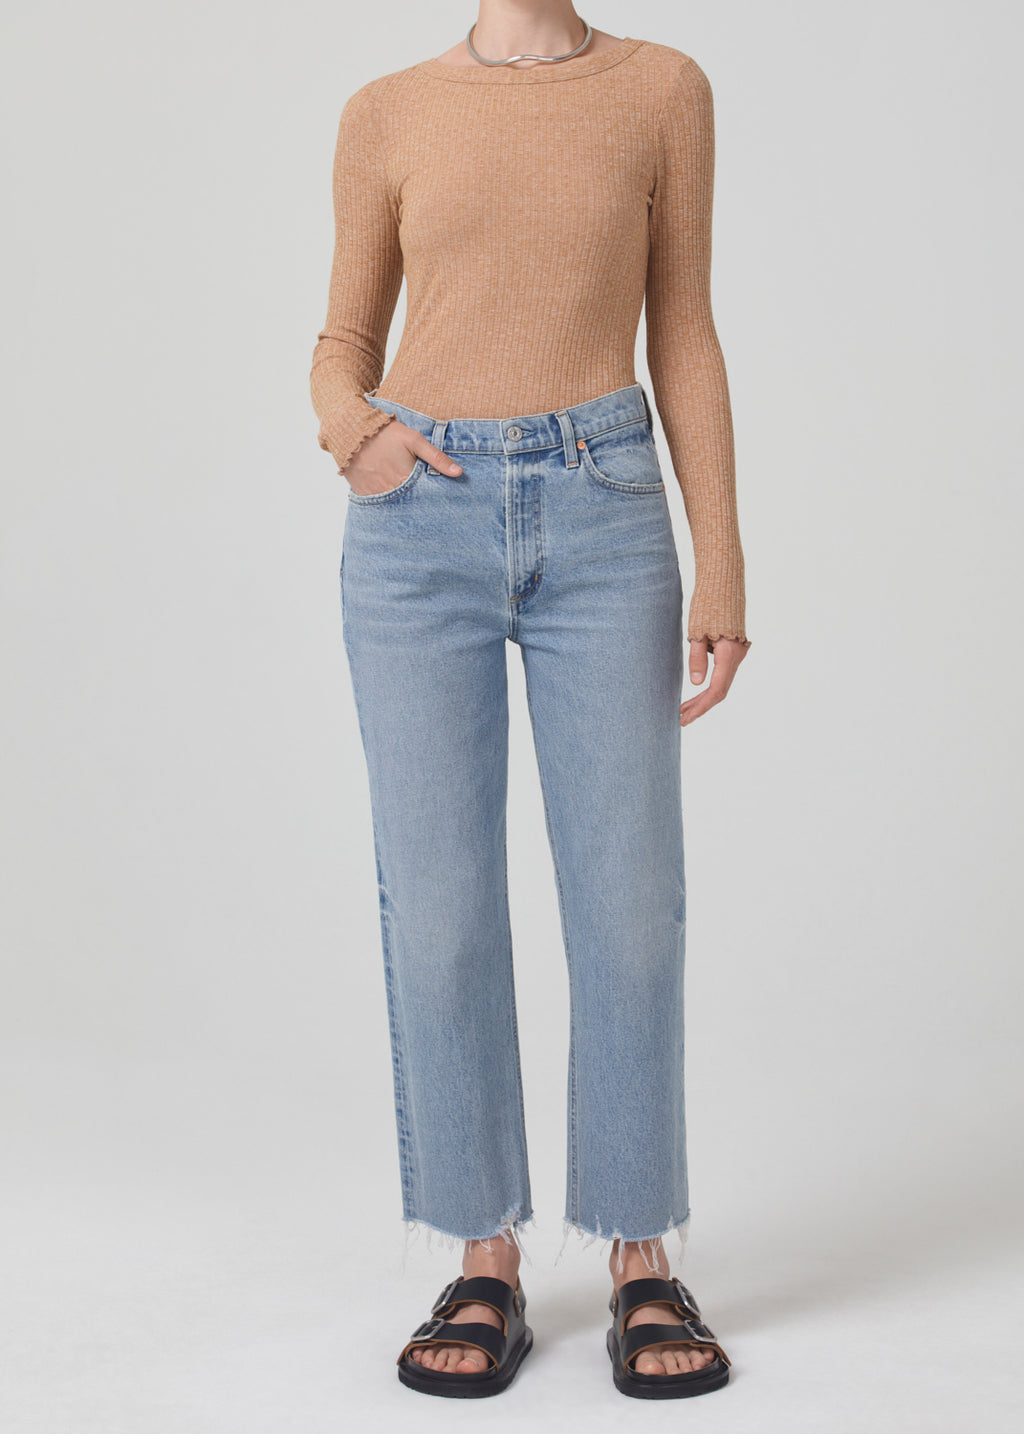 Daphne Crop High Rise Stovepipe in Checkmate – Citizens of